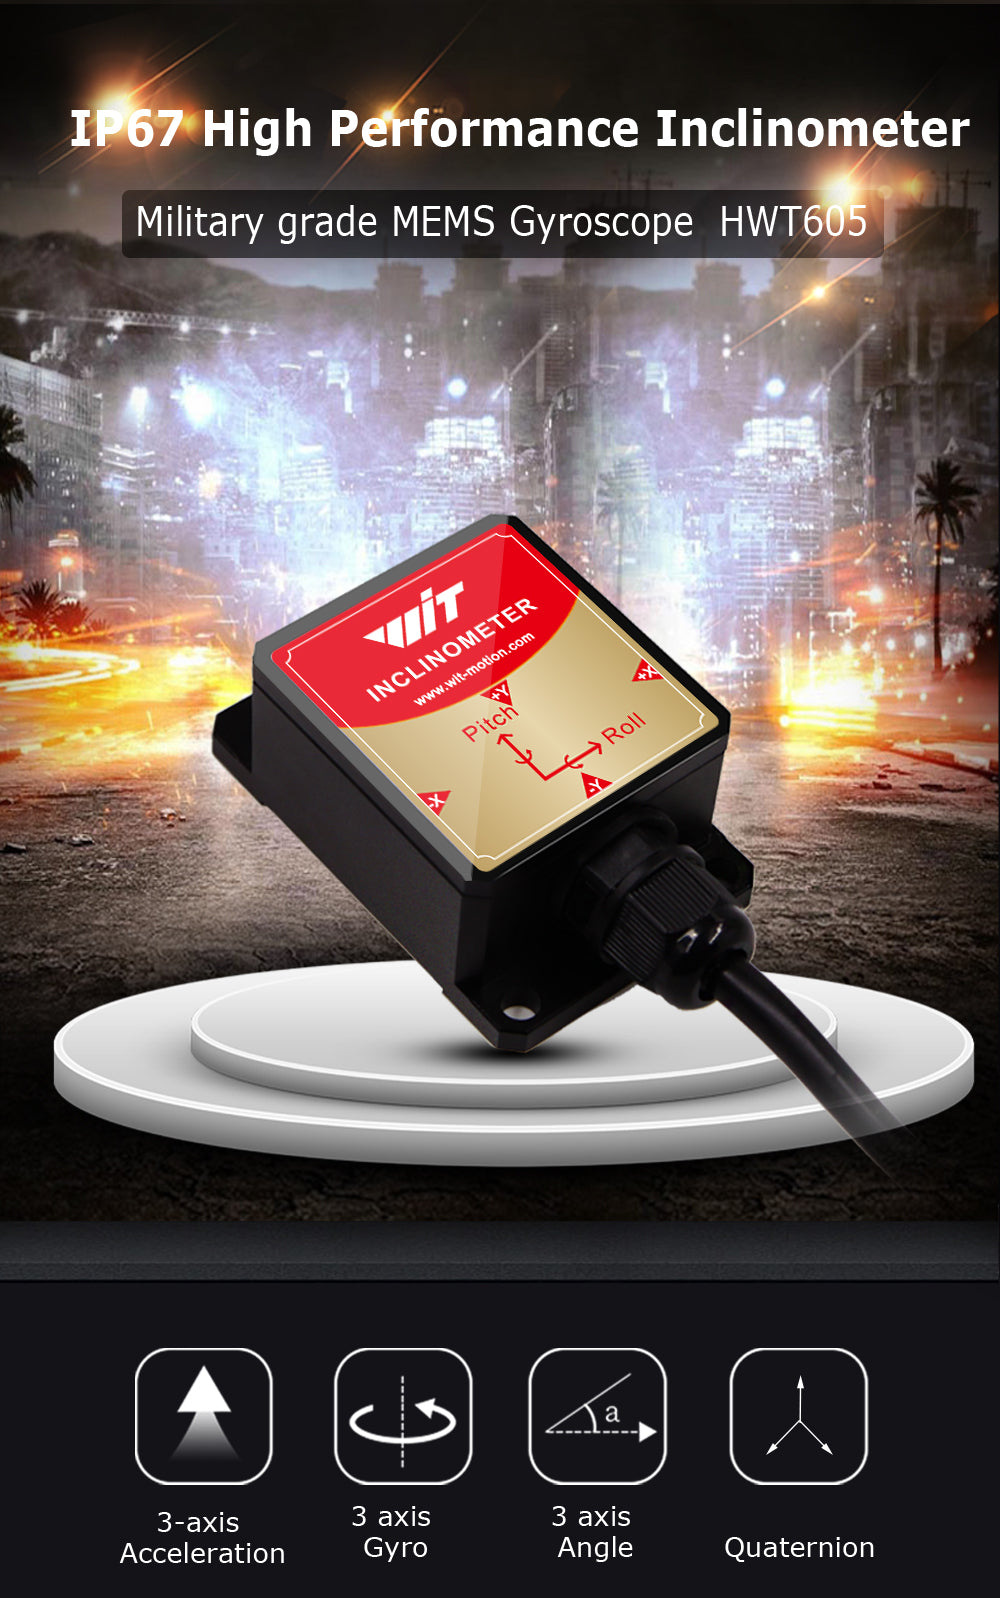 [Military grade accelerometer + inclinometer] HWT605-TTL/232 6-axis gyroscope + angle (XY 0.05° accuracy) + Kalman filter digital compass, IP67 waterproof